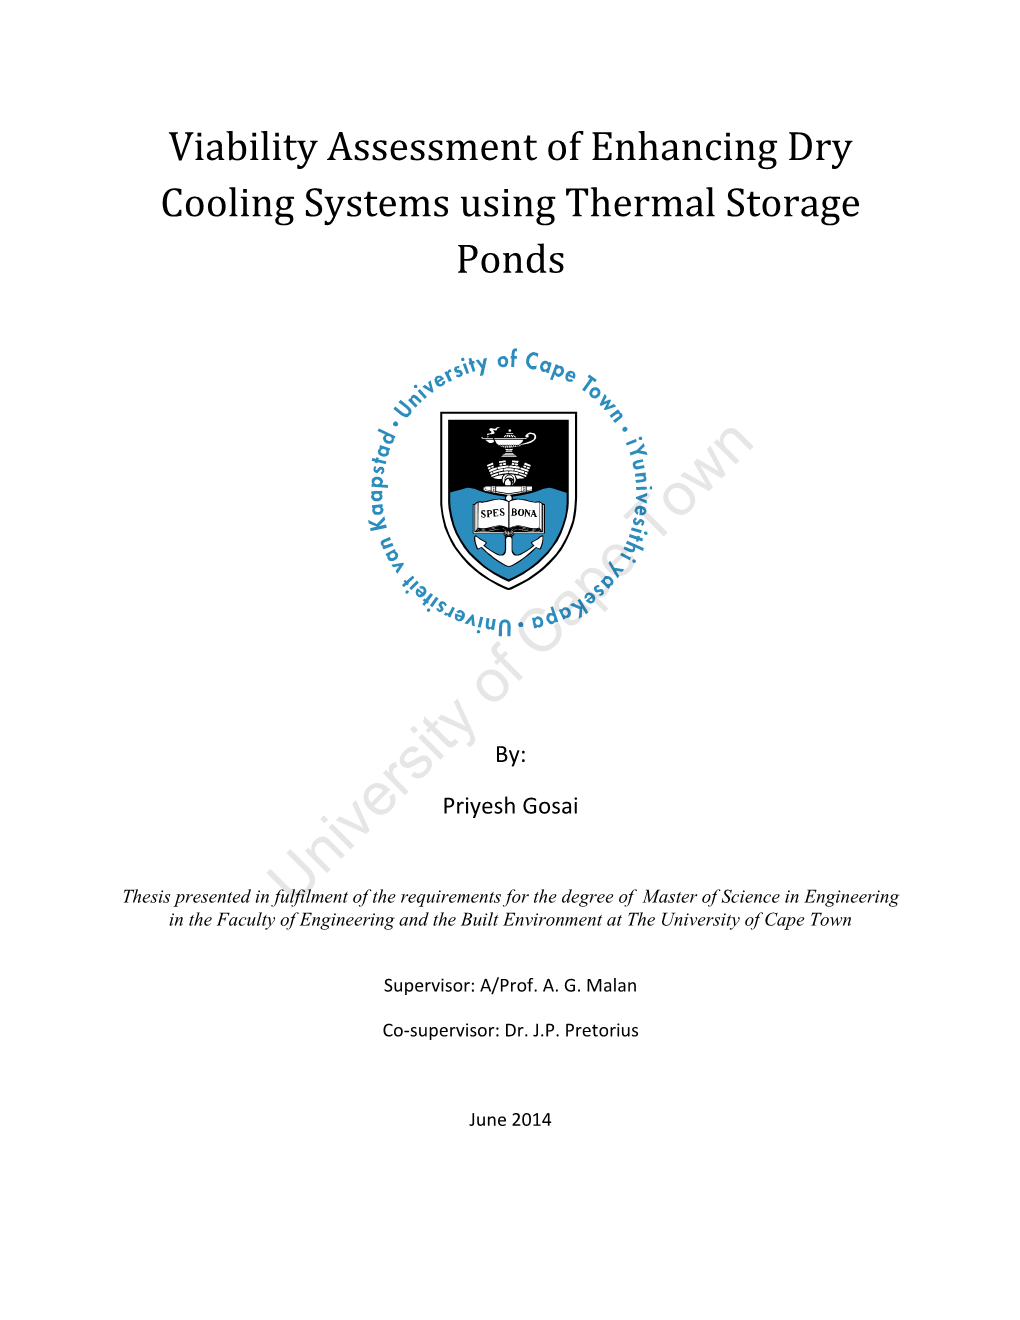 Viability Assessment of Enhancing Dry Cooling Systems Using Thermal Storage Ponds